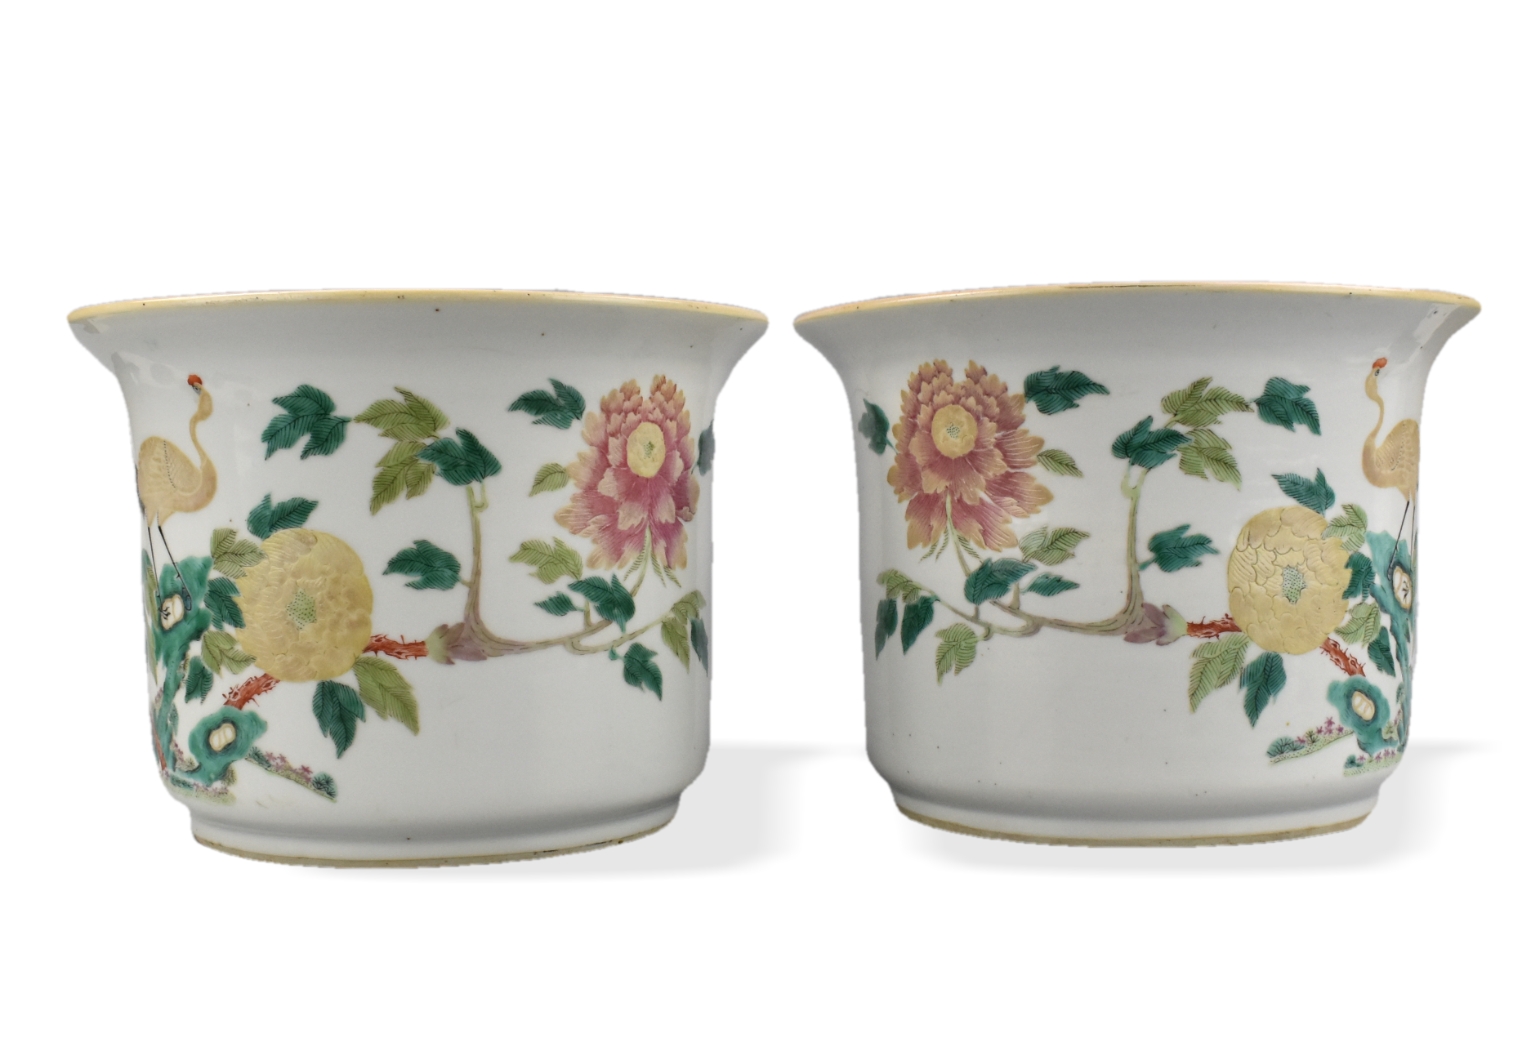 PAIR OF CHINESE FAMILLE ROSE PLANTERS,19TH